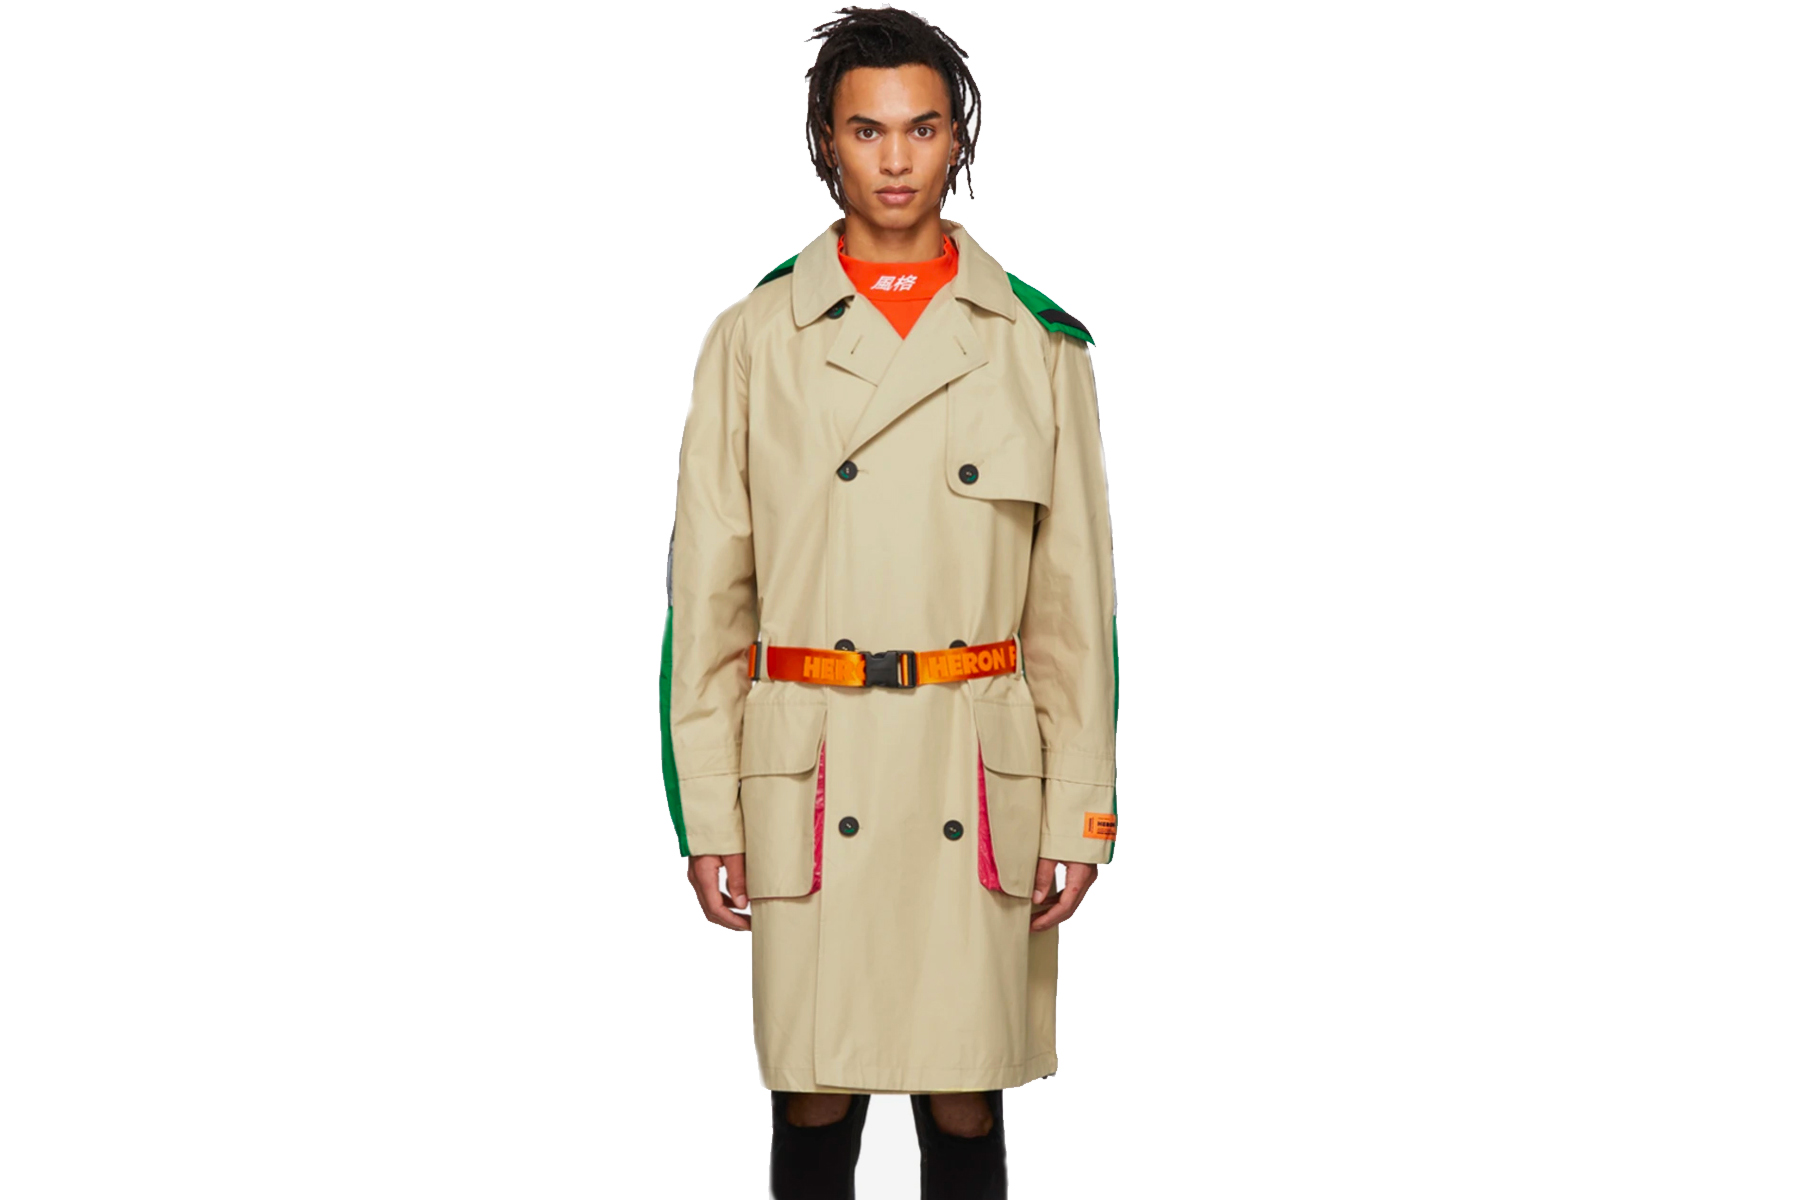 Heron Preston Shows Us His Take on the Classic Trench Coat